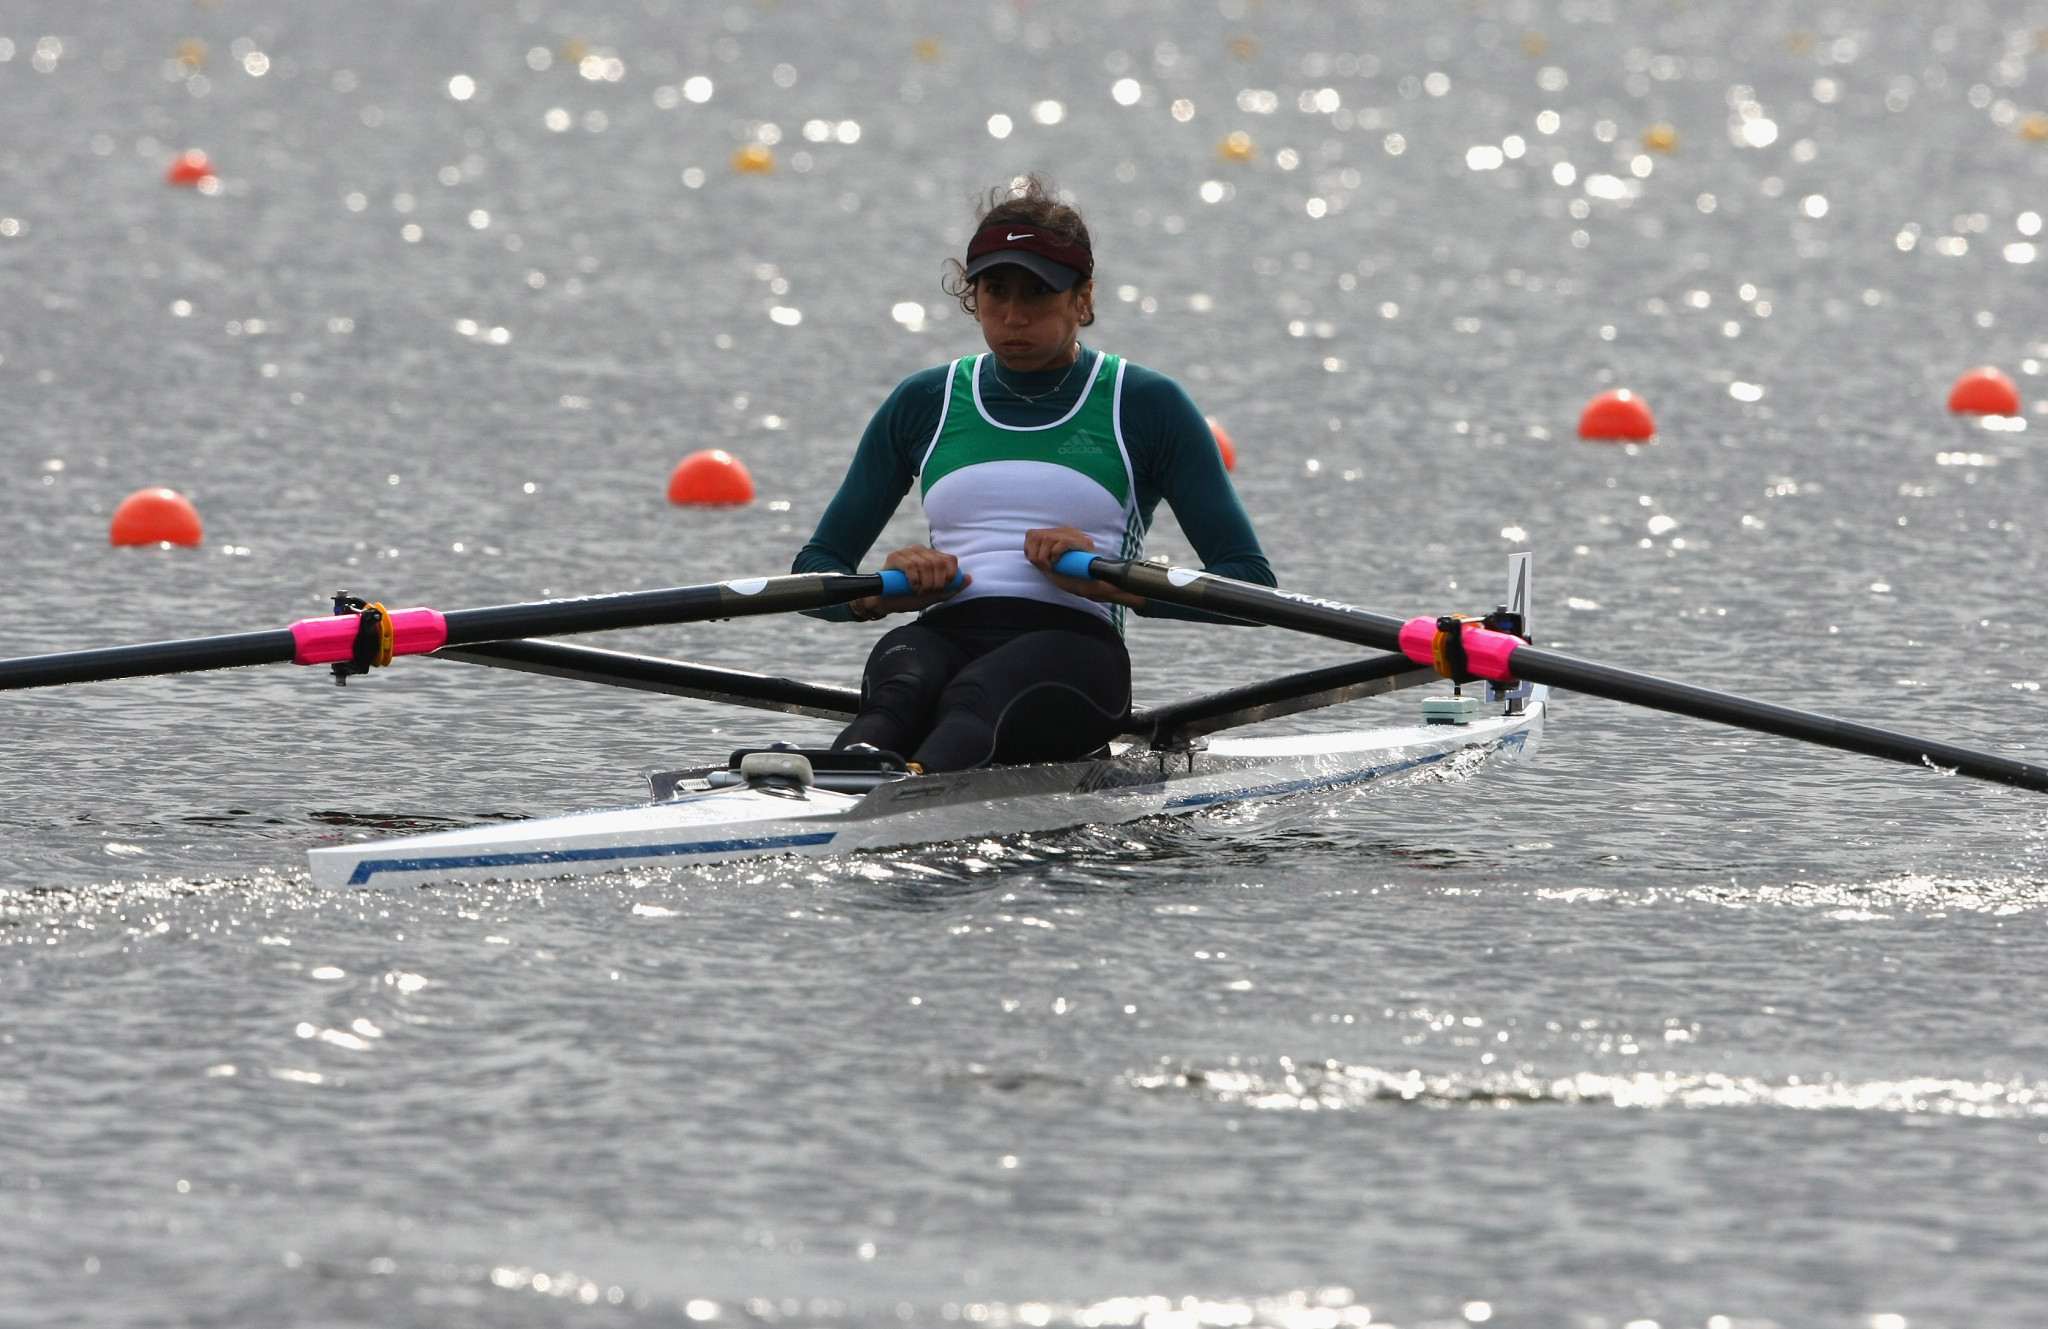 Amina Rouba won the women's single sculls event today ©Getty Images